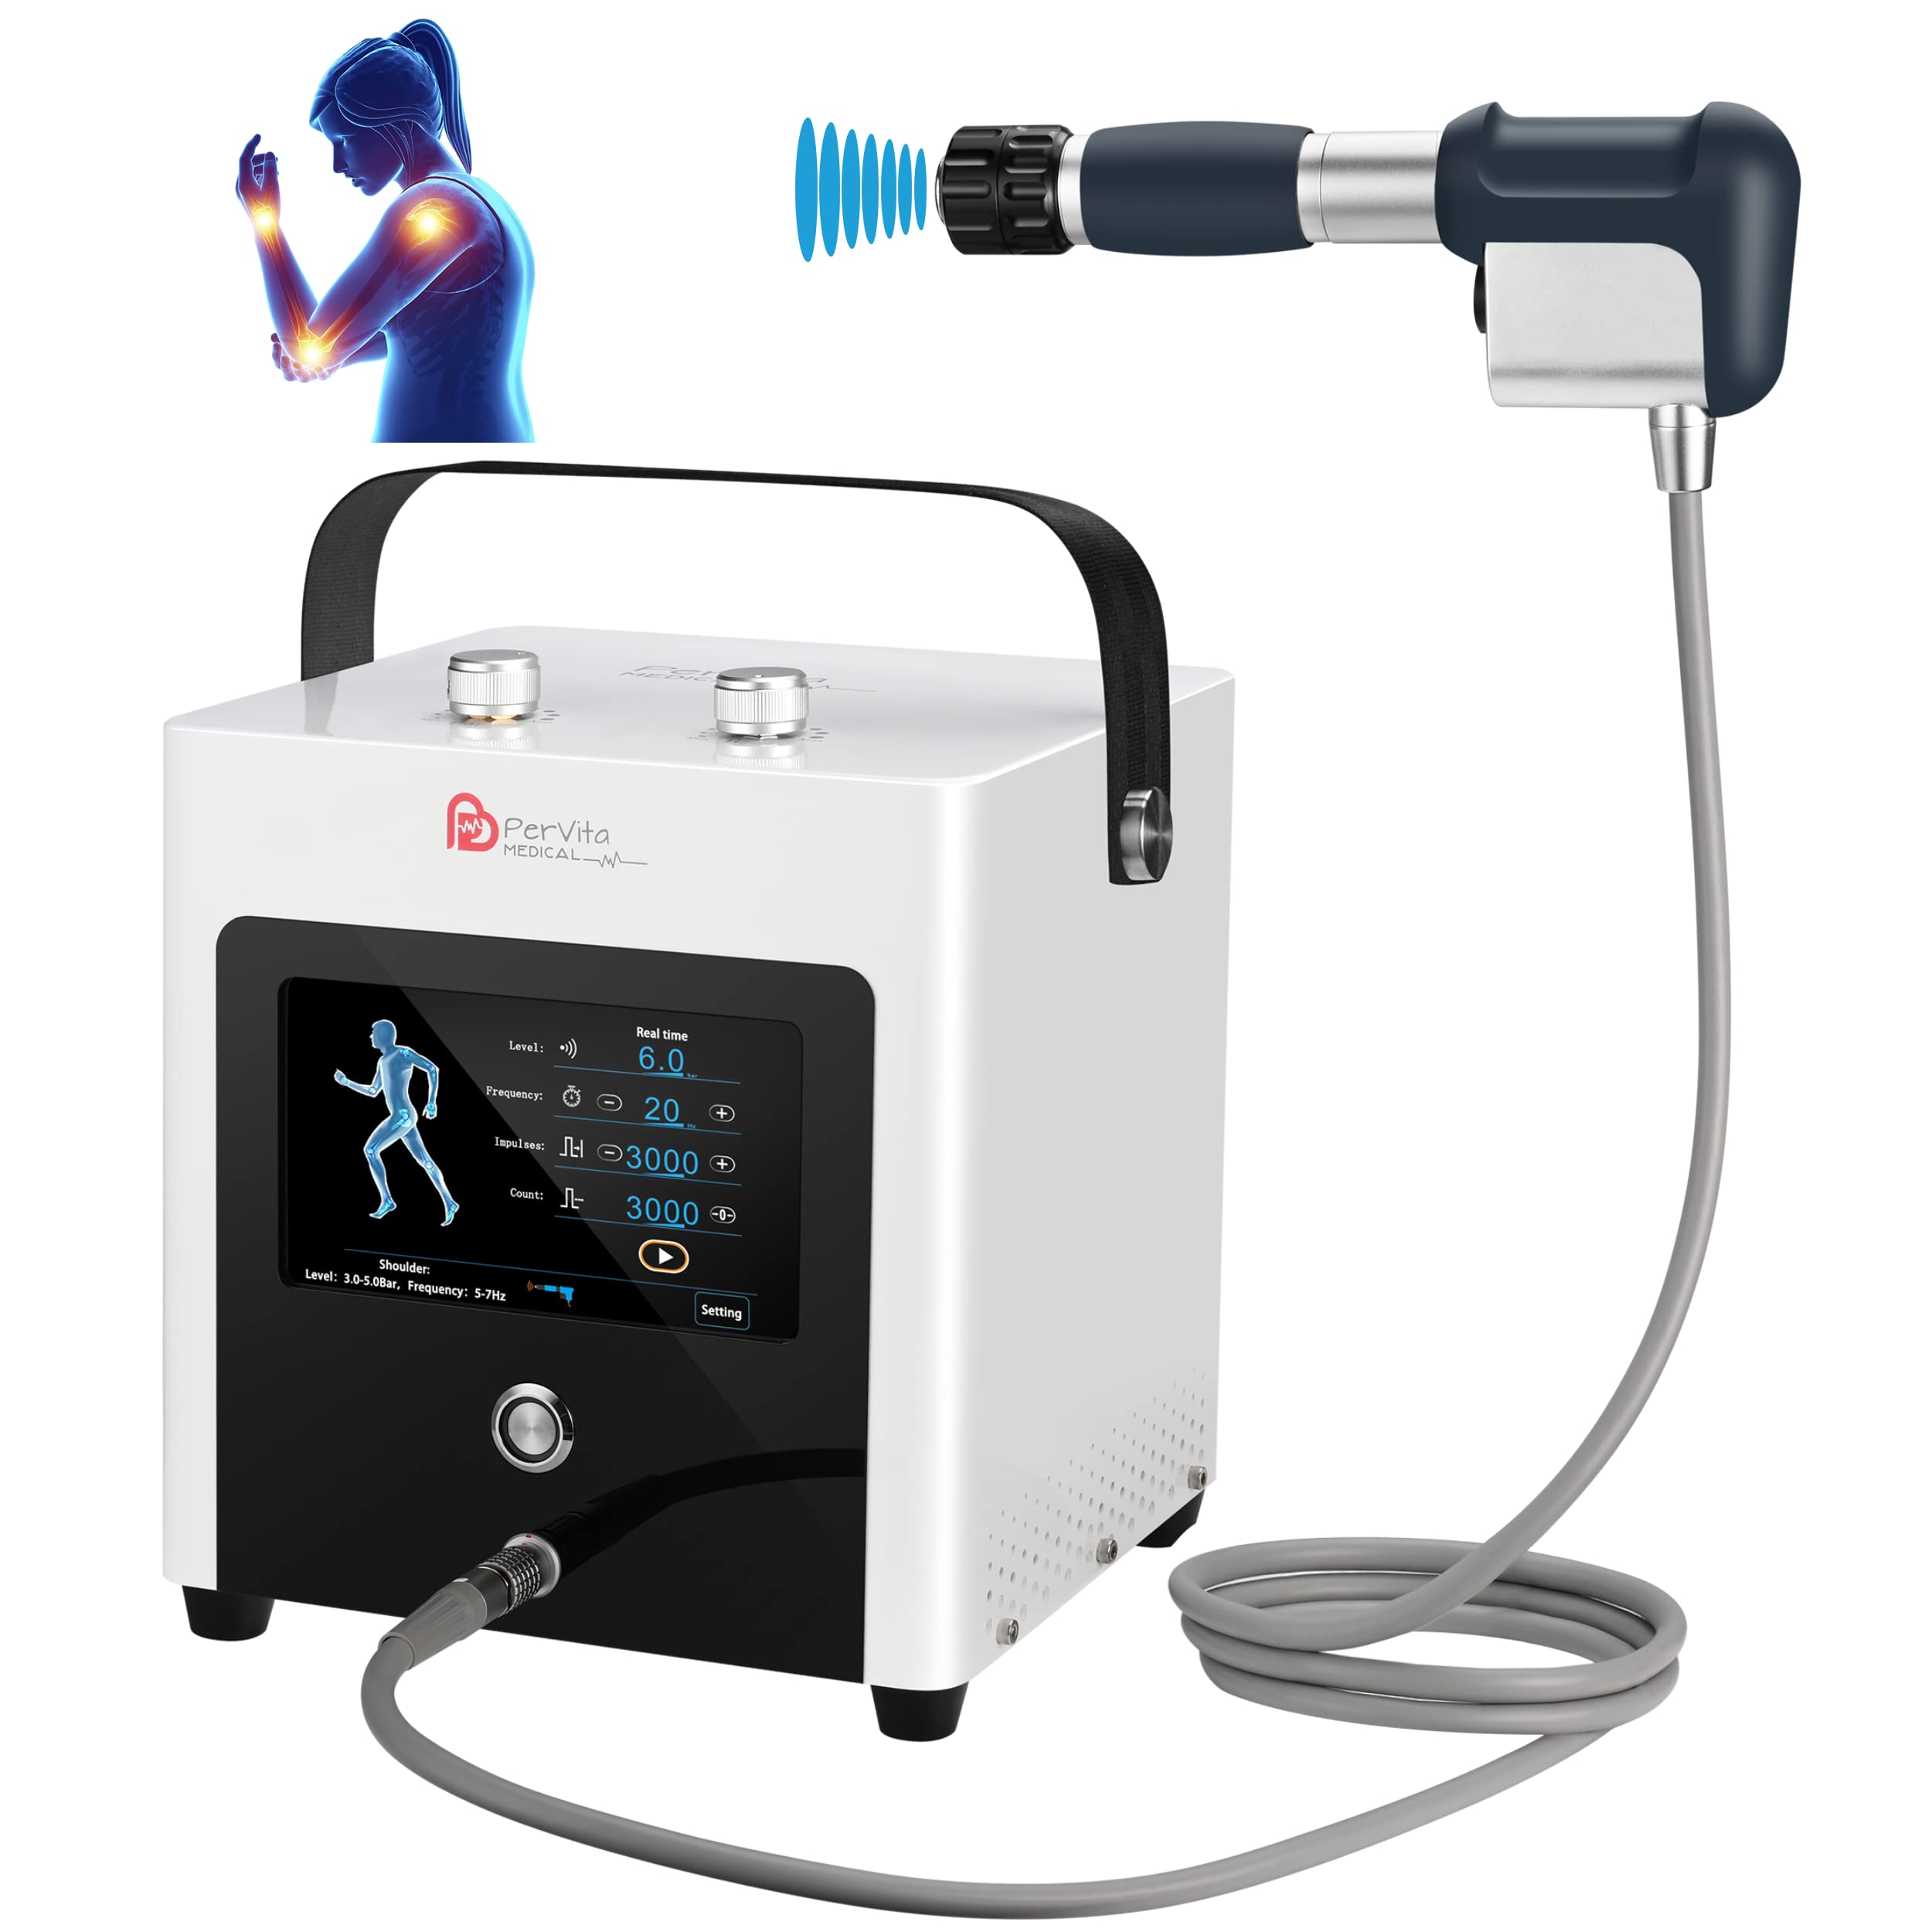 Extracorporeal Shock Wave Therapy – Pervita Medical